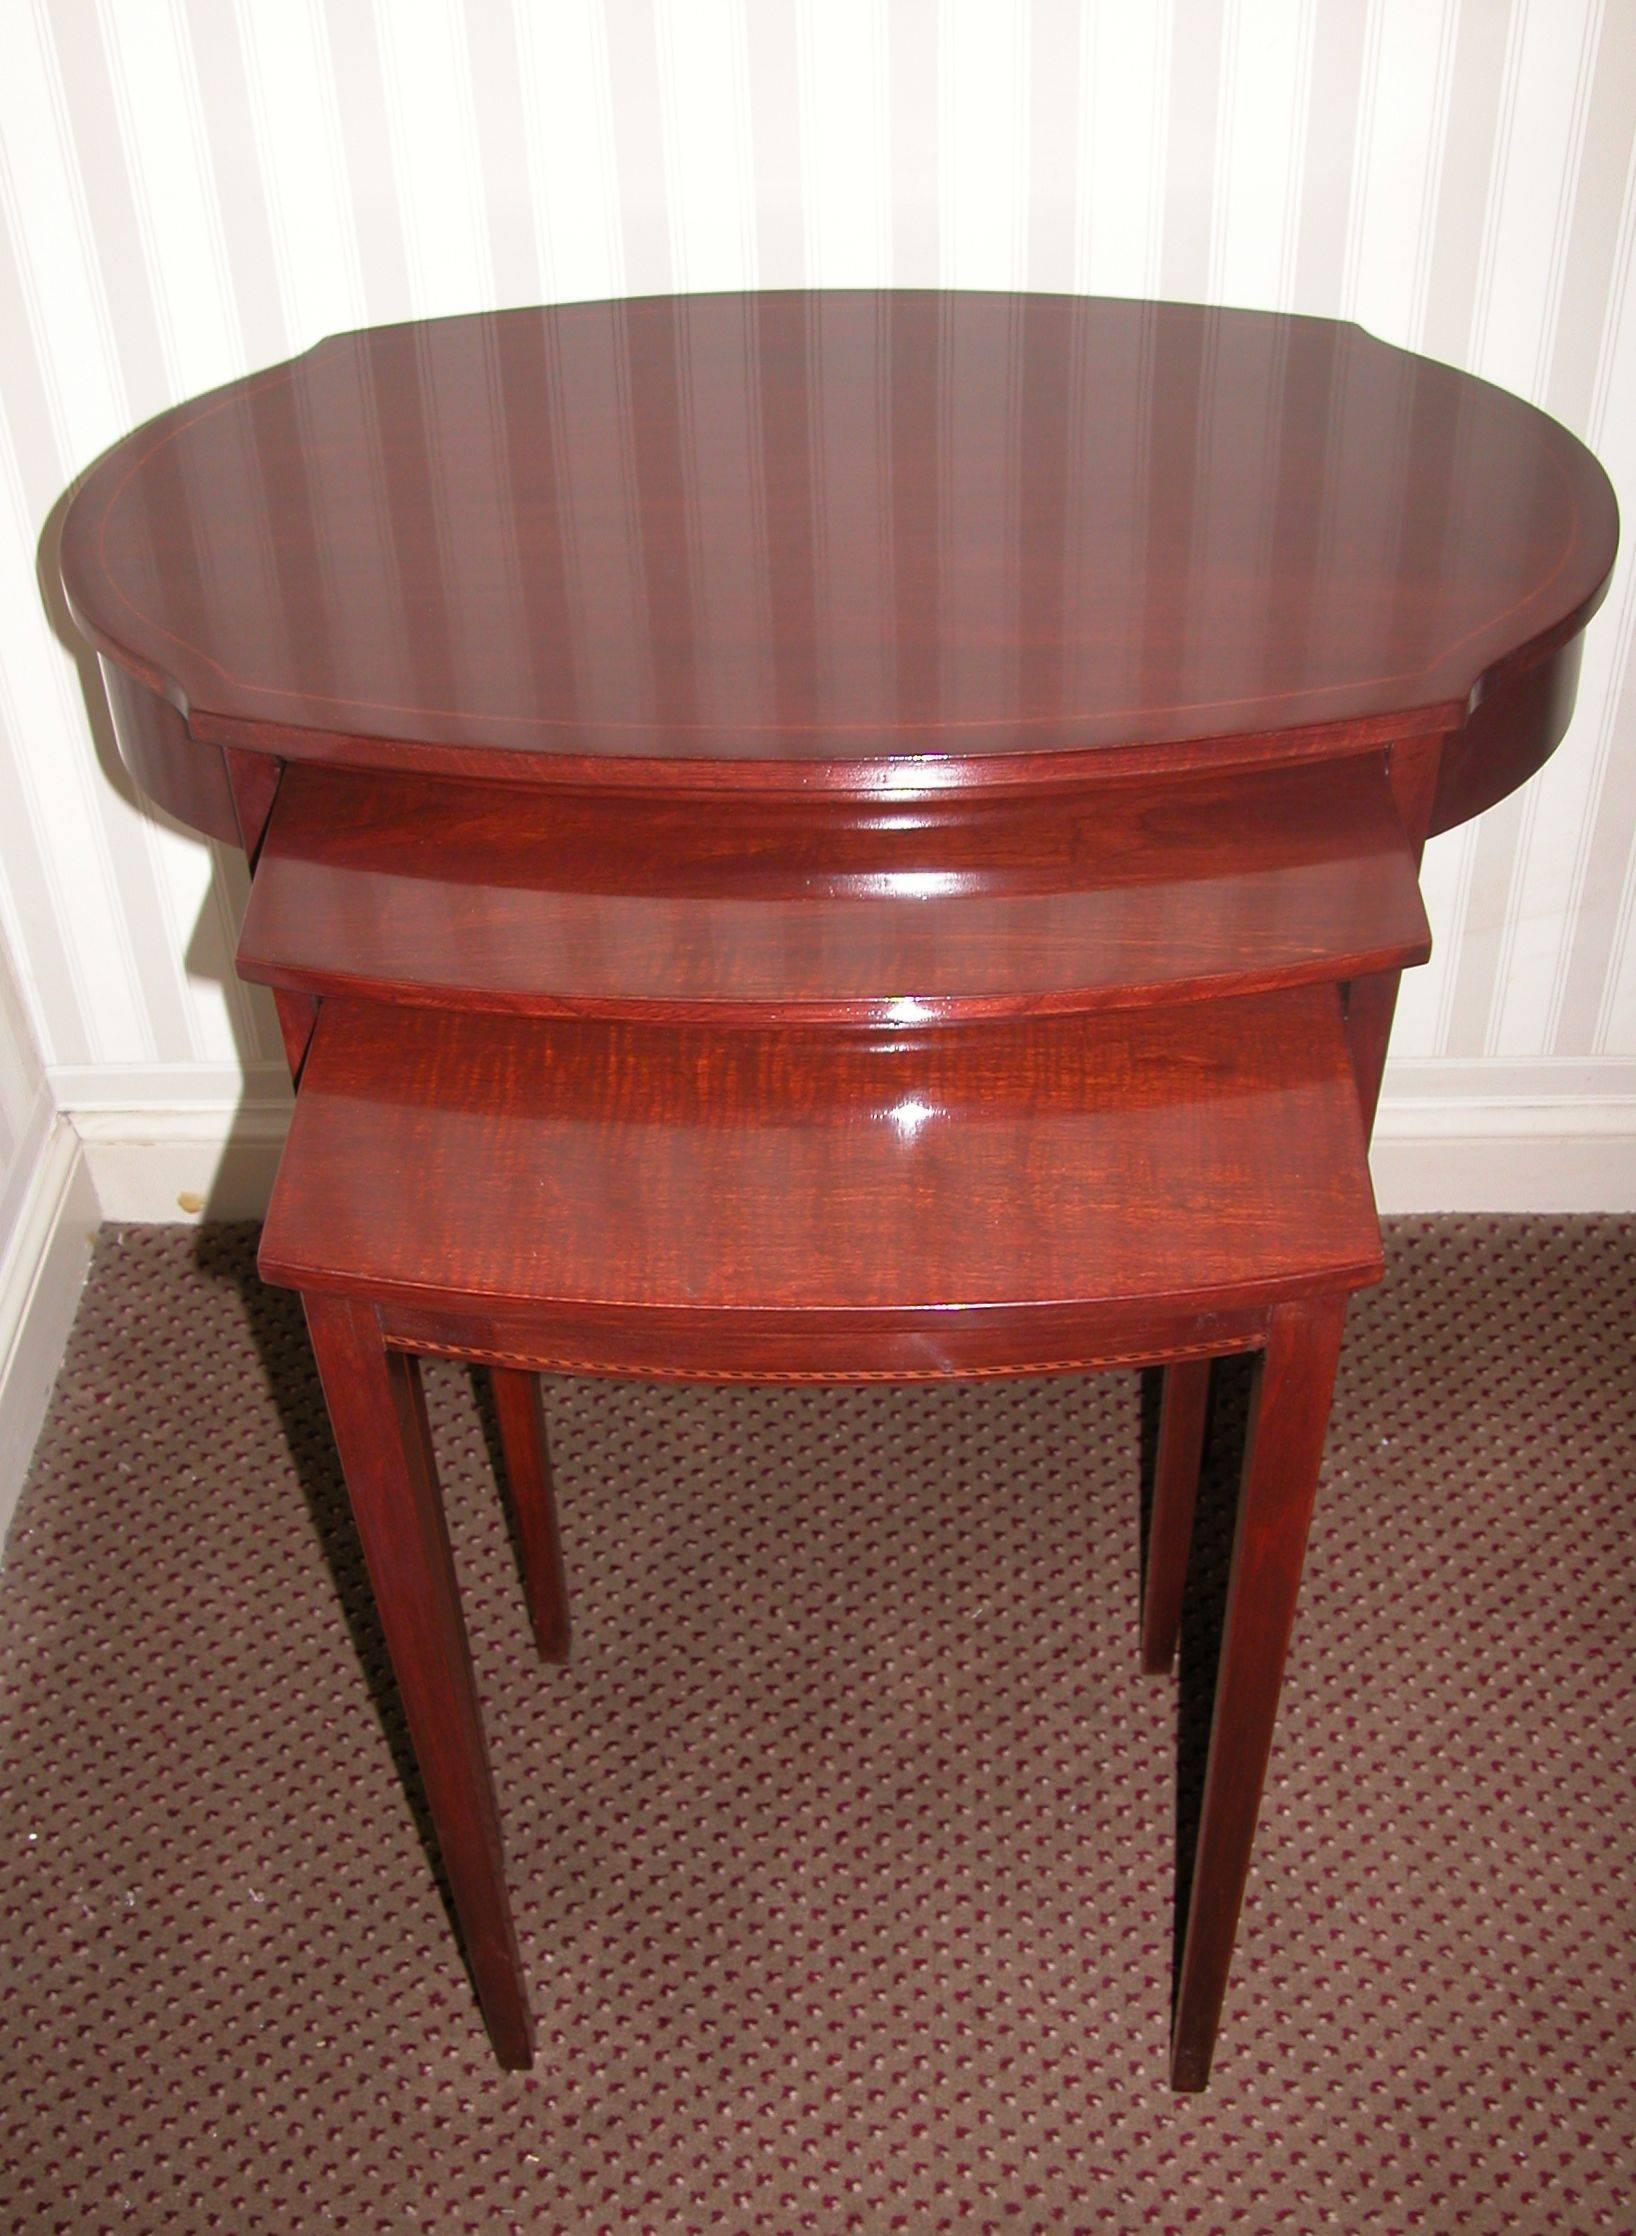 Nest of three tables in oval and rectangular form on straight- tapered legs. Recently refinished and in excellent condition. Middle tray is 17.5